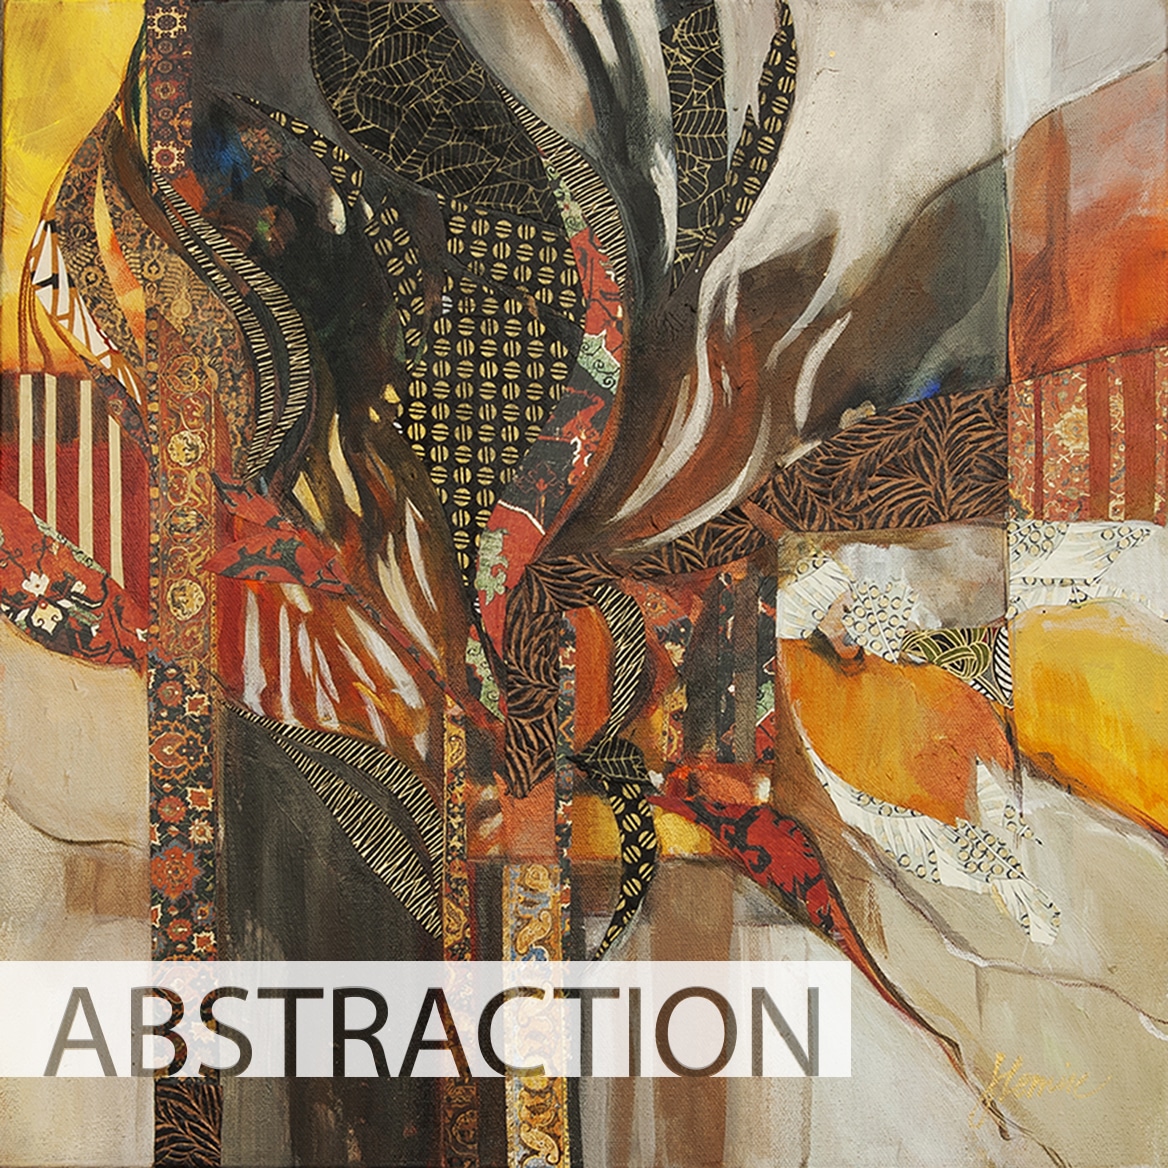 ABSTRACTION